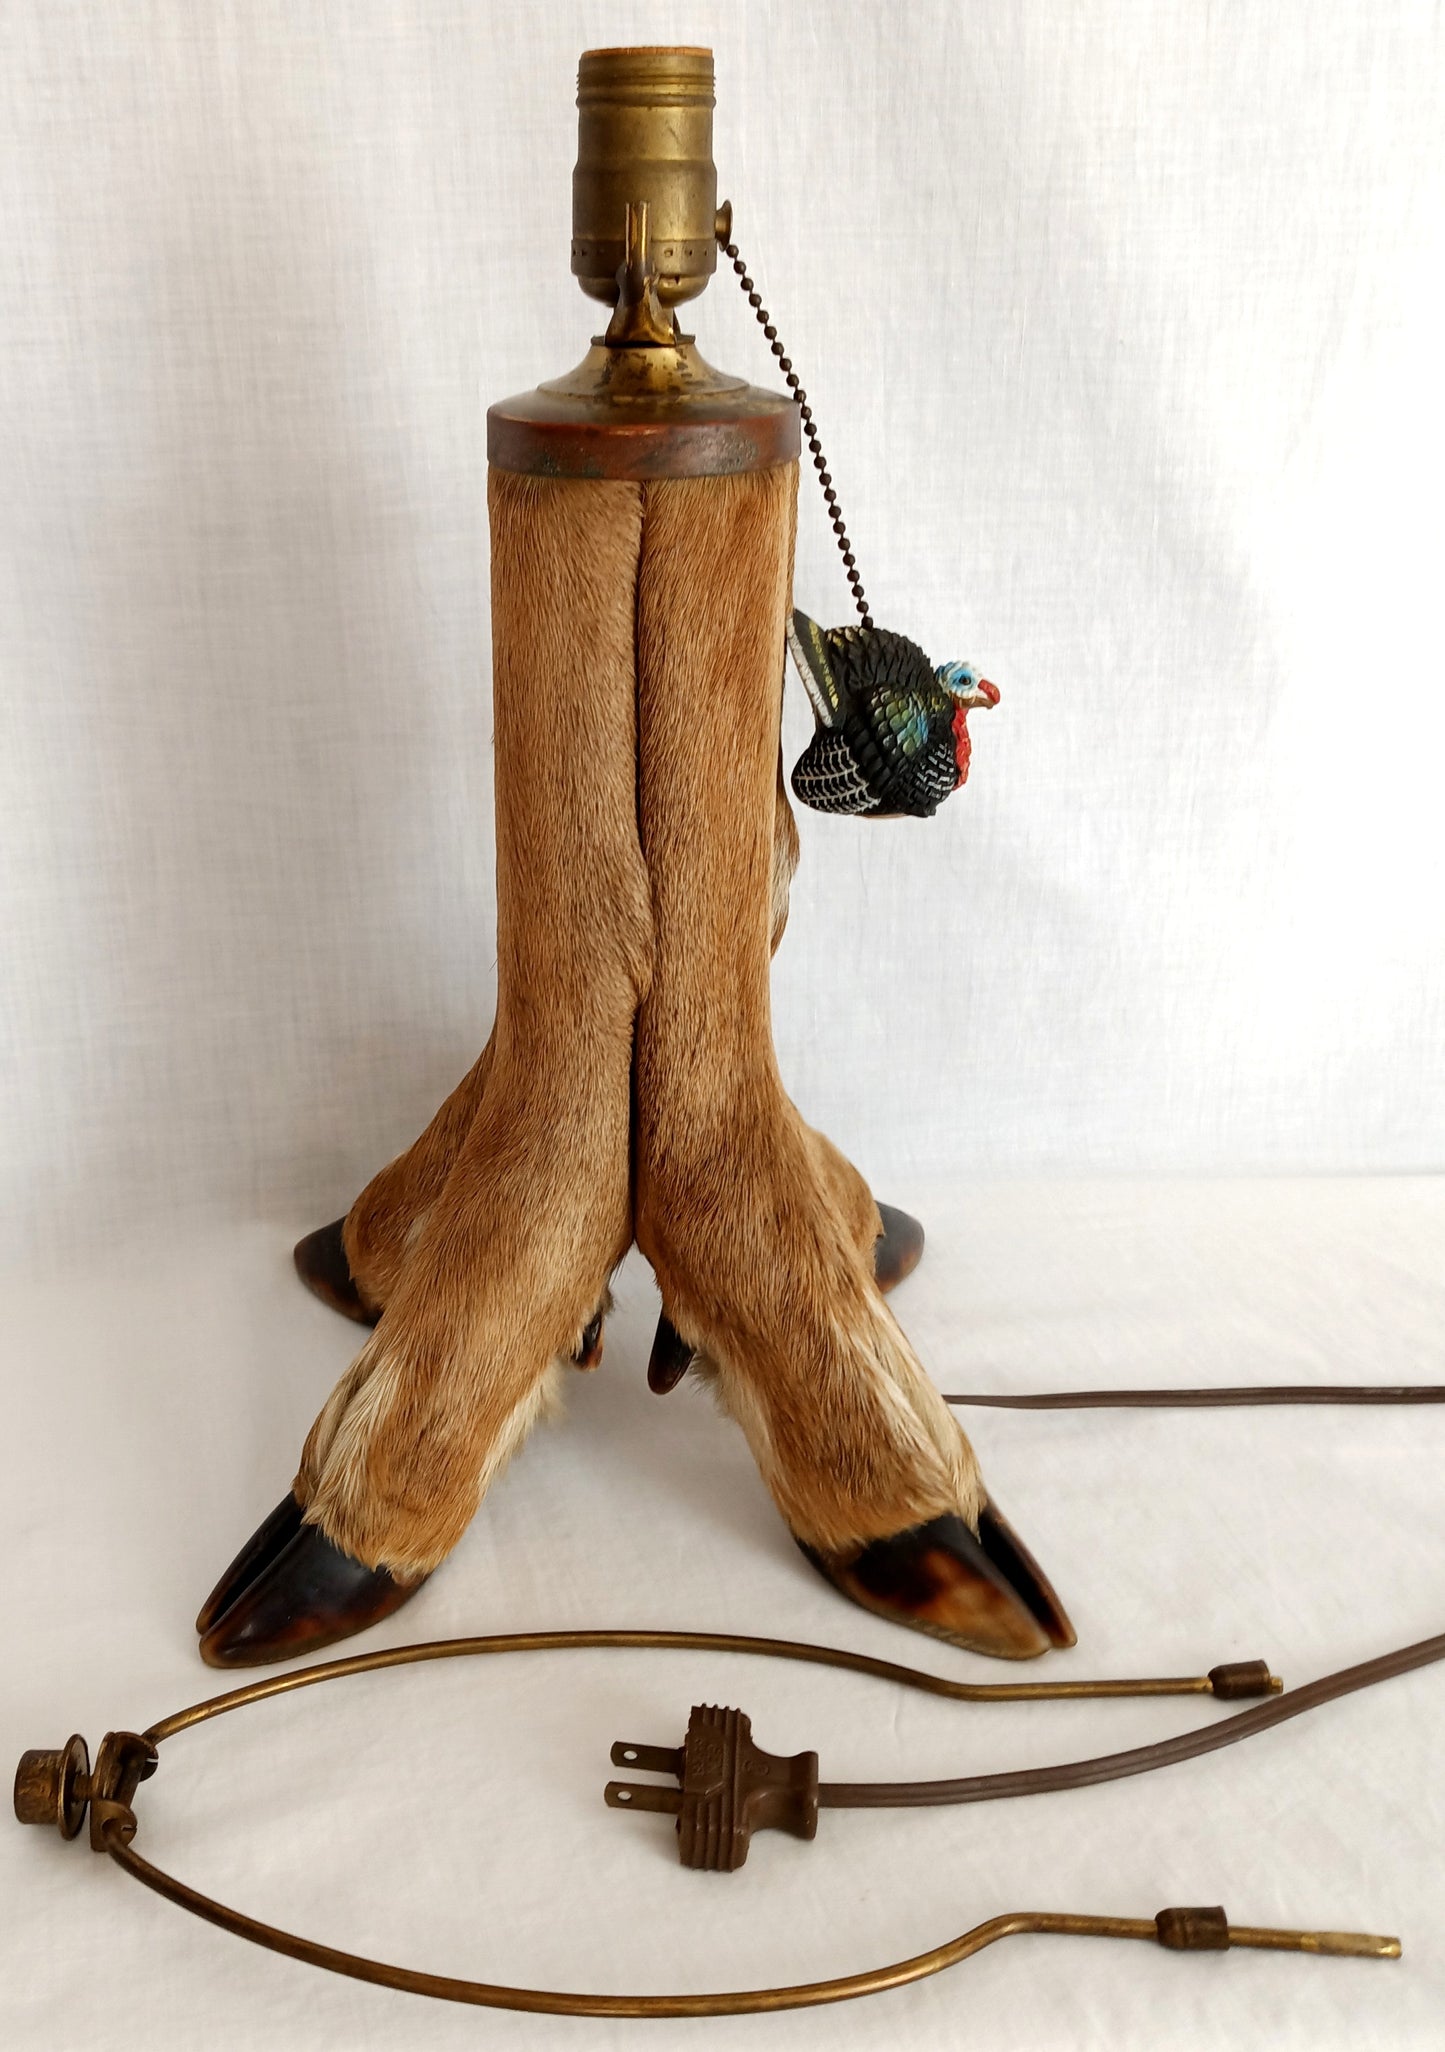 VTG Taxidermy Oddity Deer 4 Hoof Table Lamp Brass Accent Harp Finial Pull Chain Ornament Rustic Cabin Cave Man Hunting Décor Statement Piece